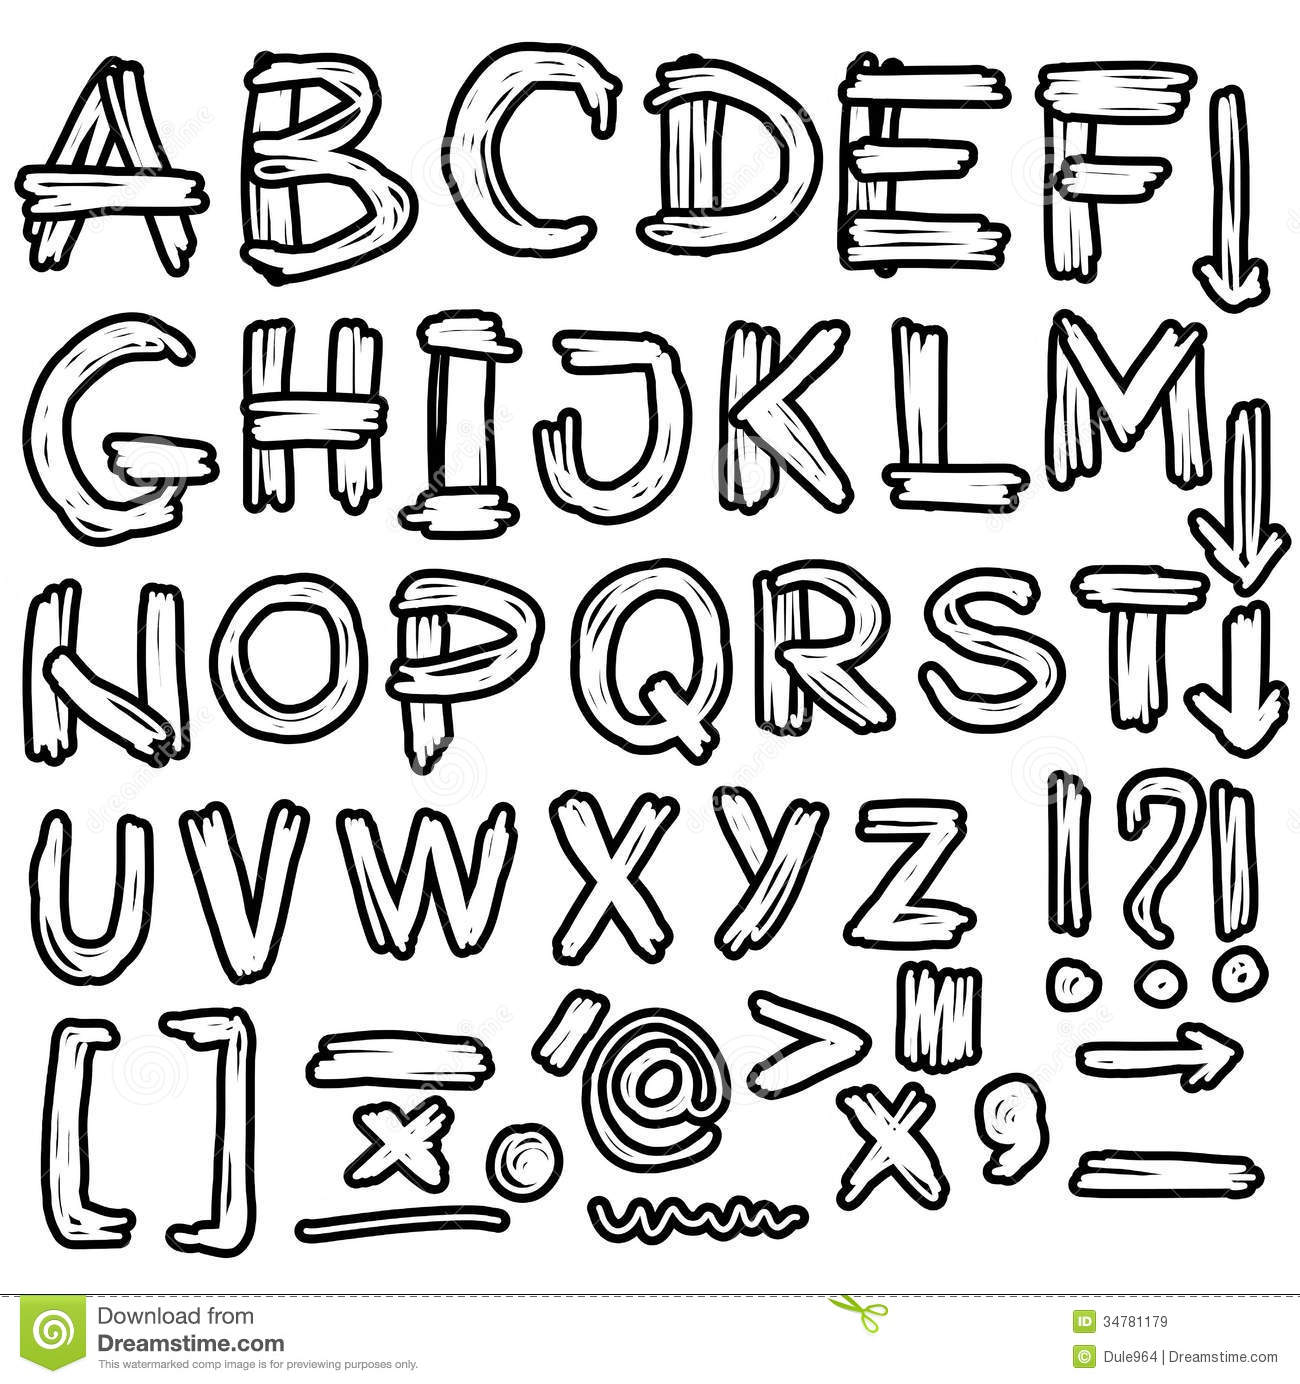 11 Drawing Font Styles Images Design Lettering Styles, Graffiti